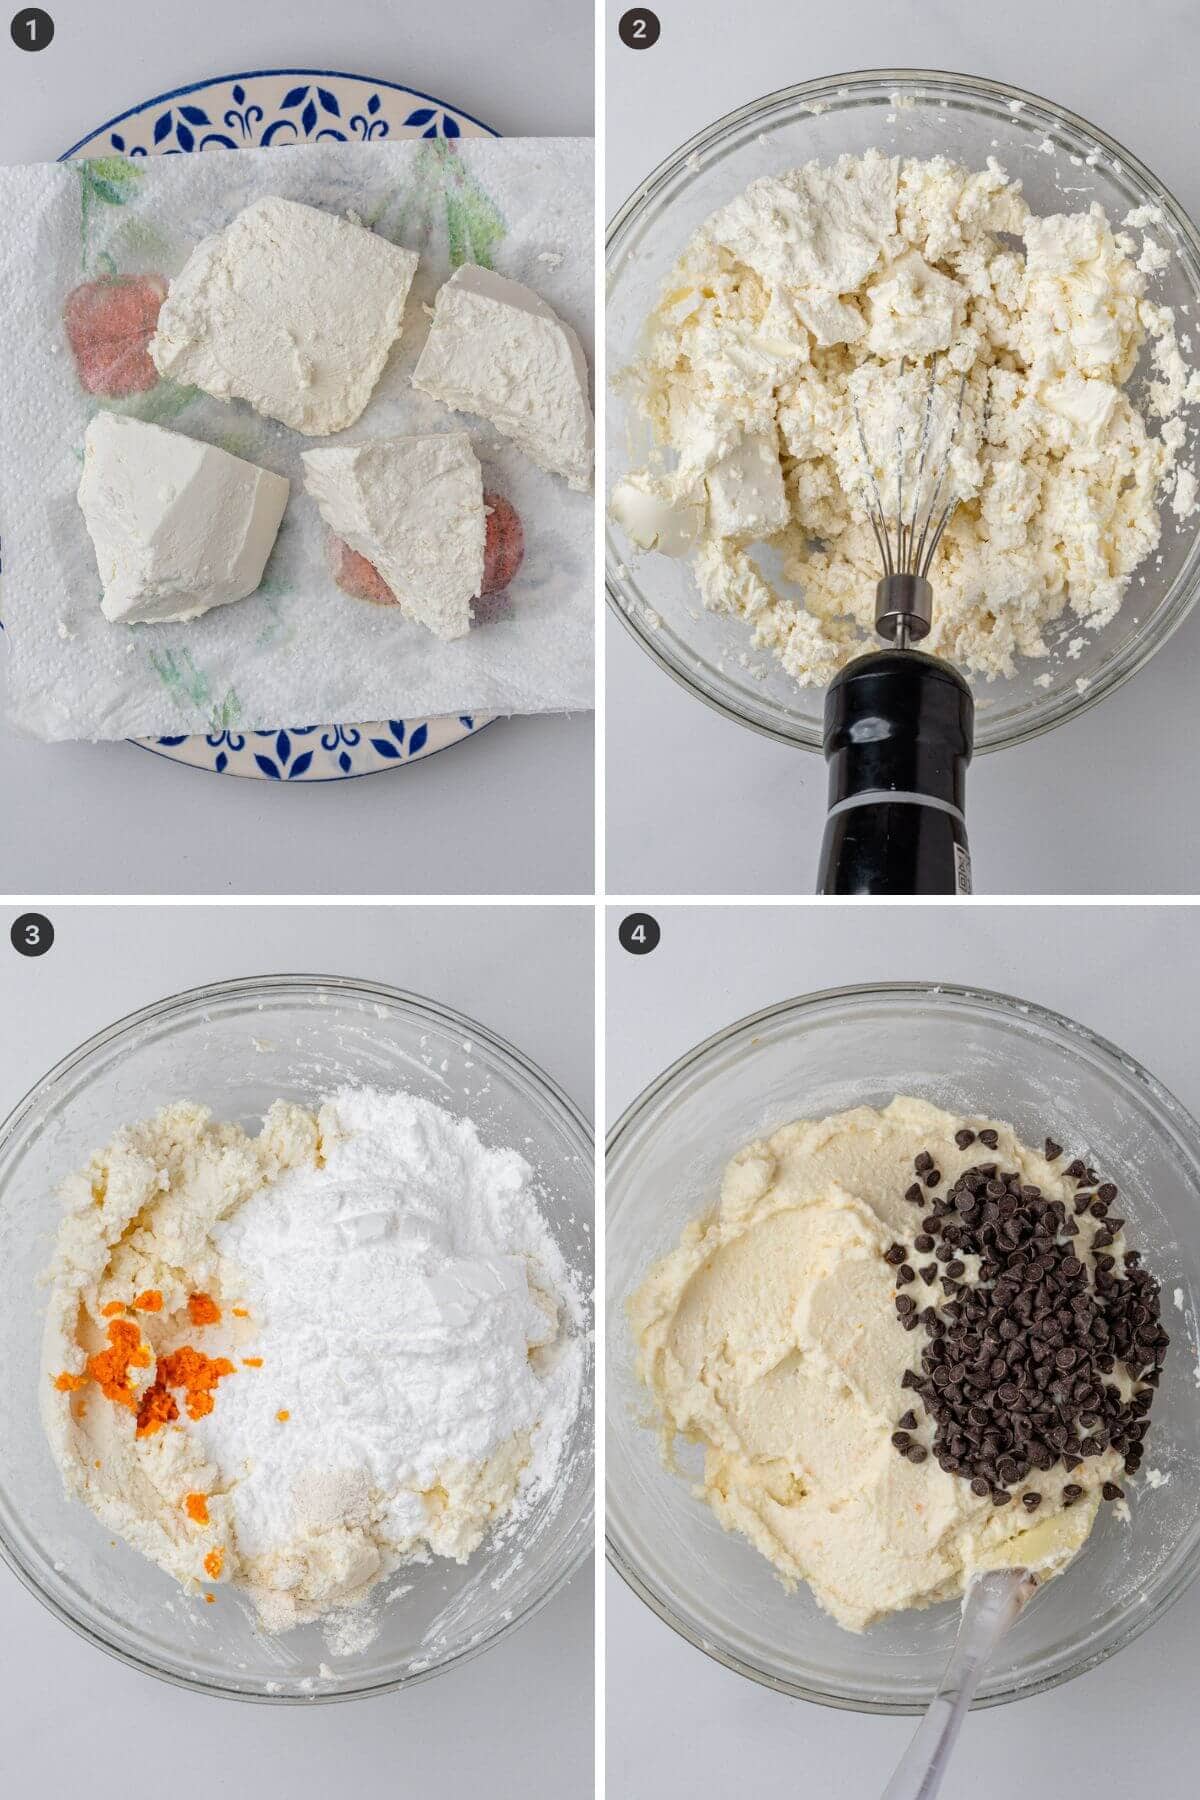 Steps on how to make cannoli dip